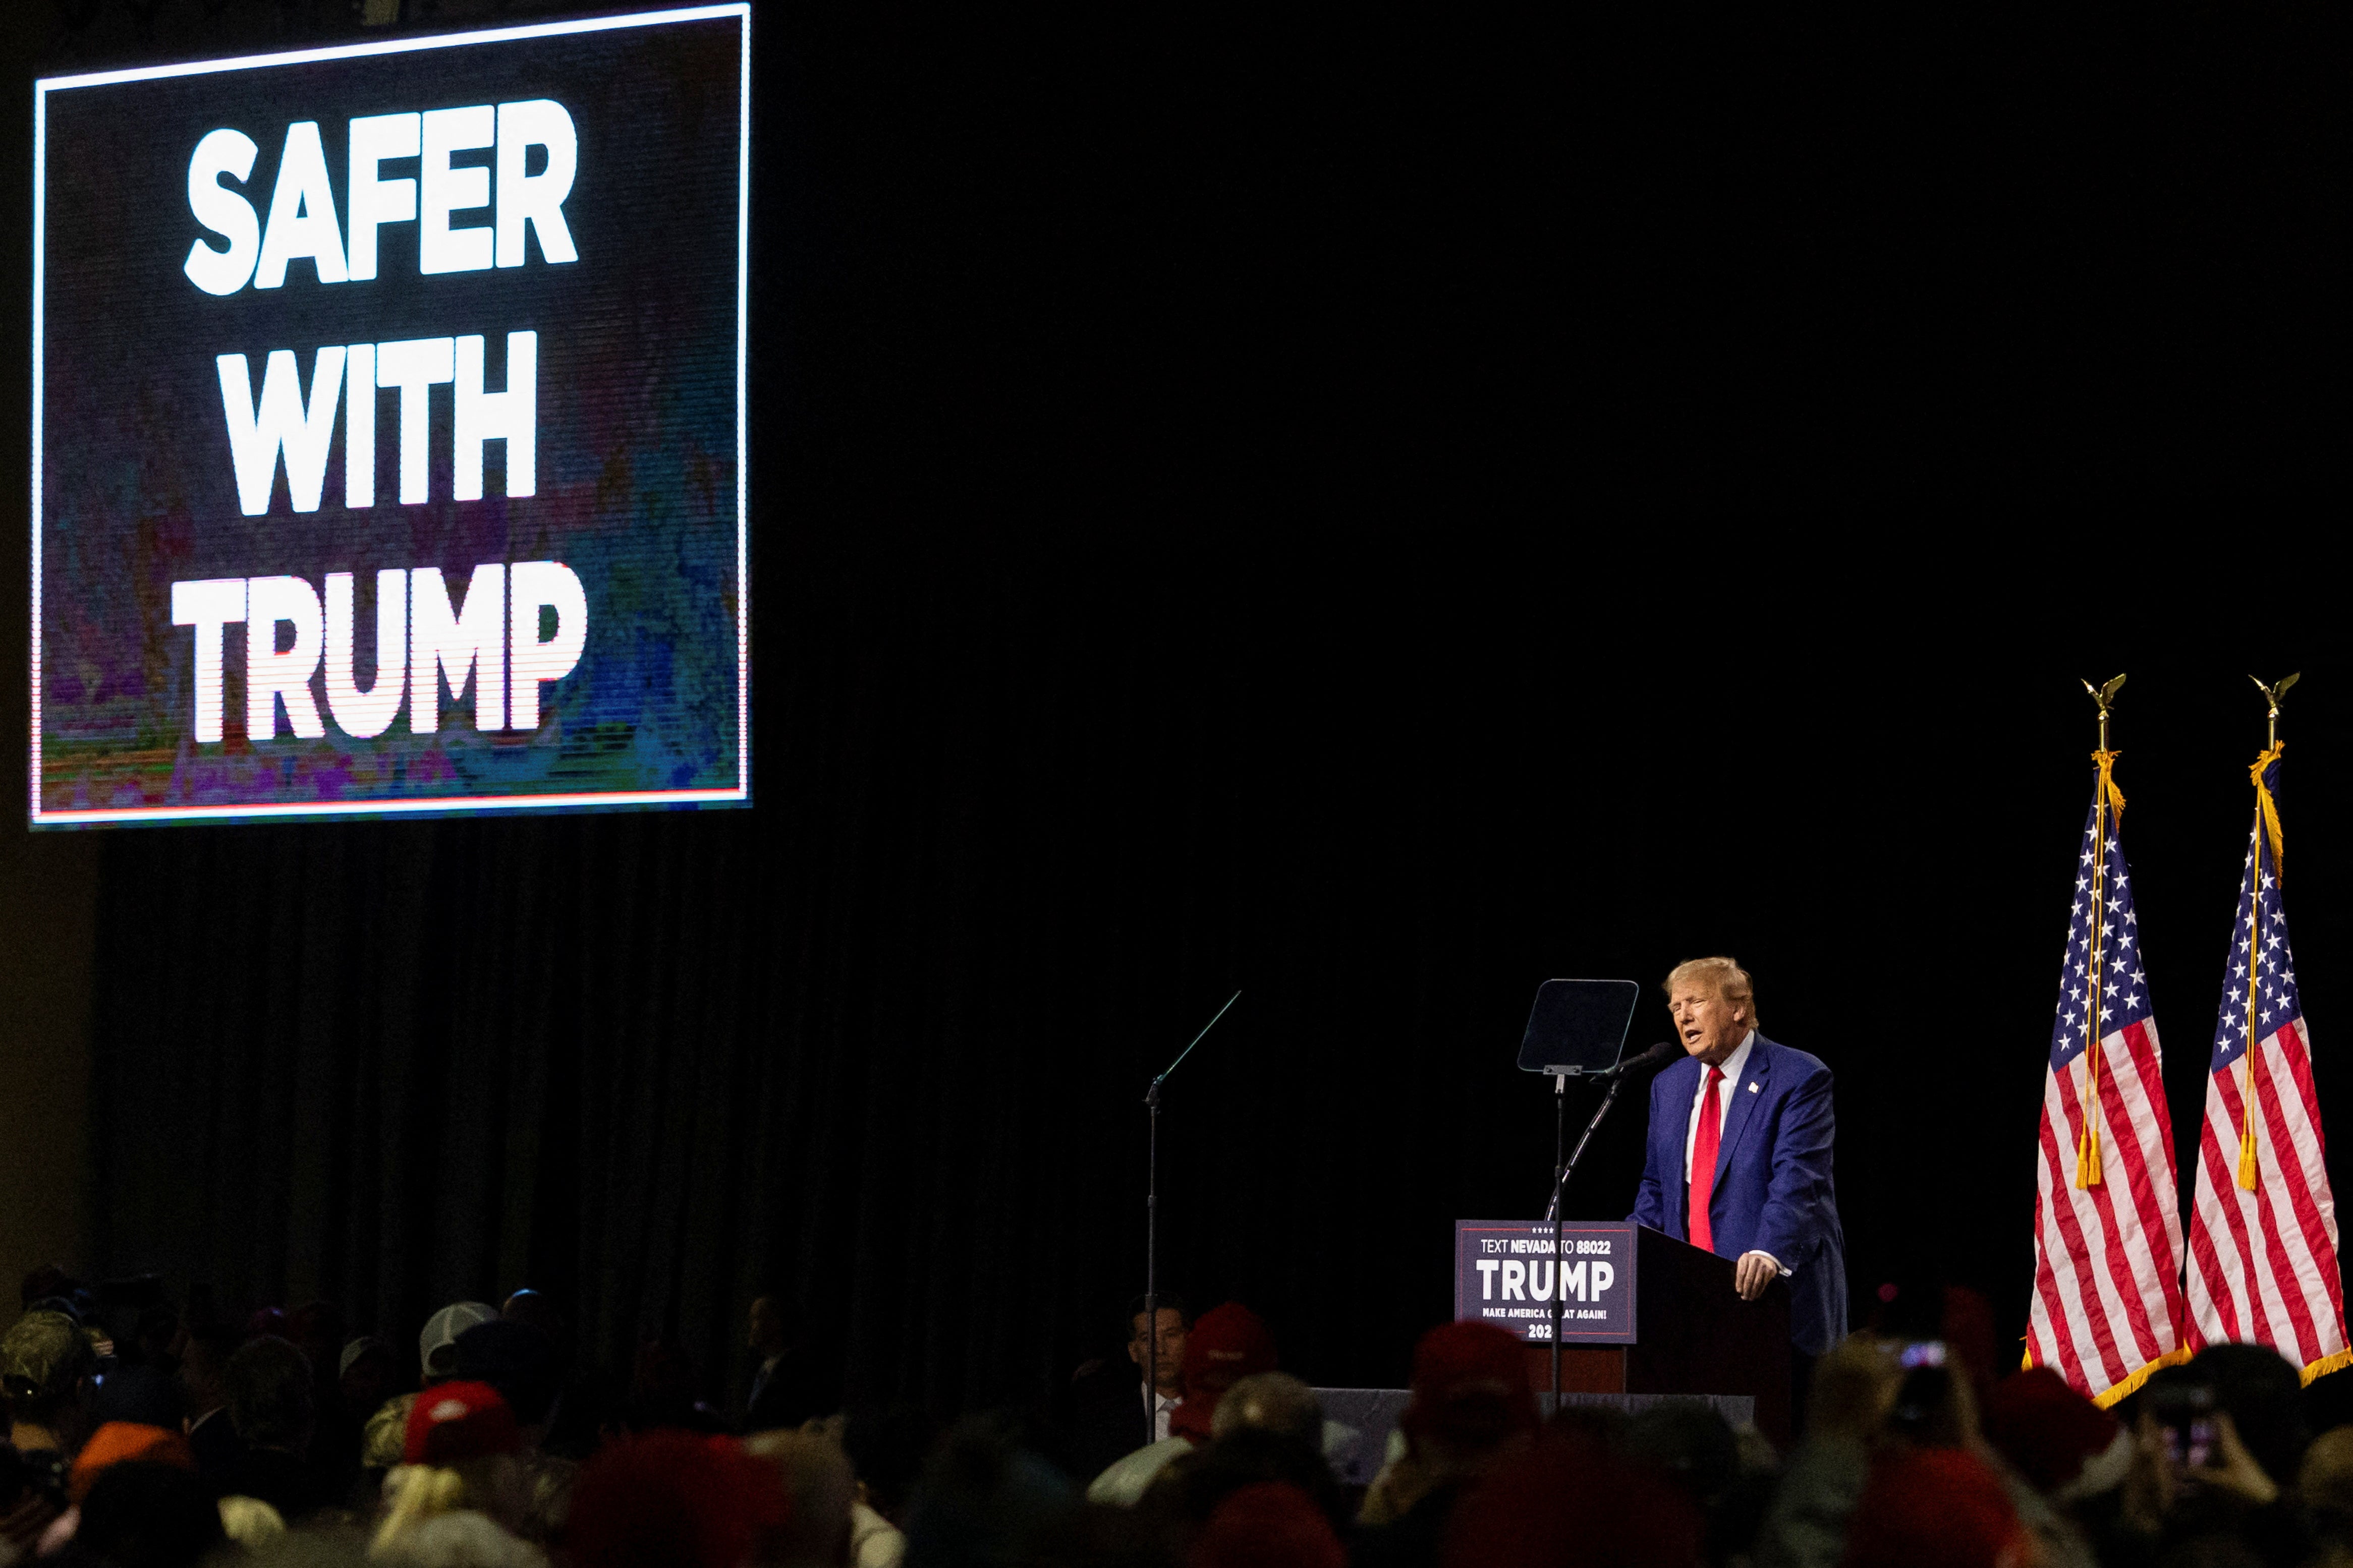 Donald Trump speaks to supporters in Reno, Nevada, on 17 December